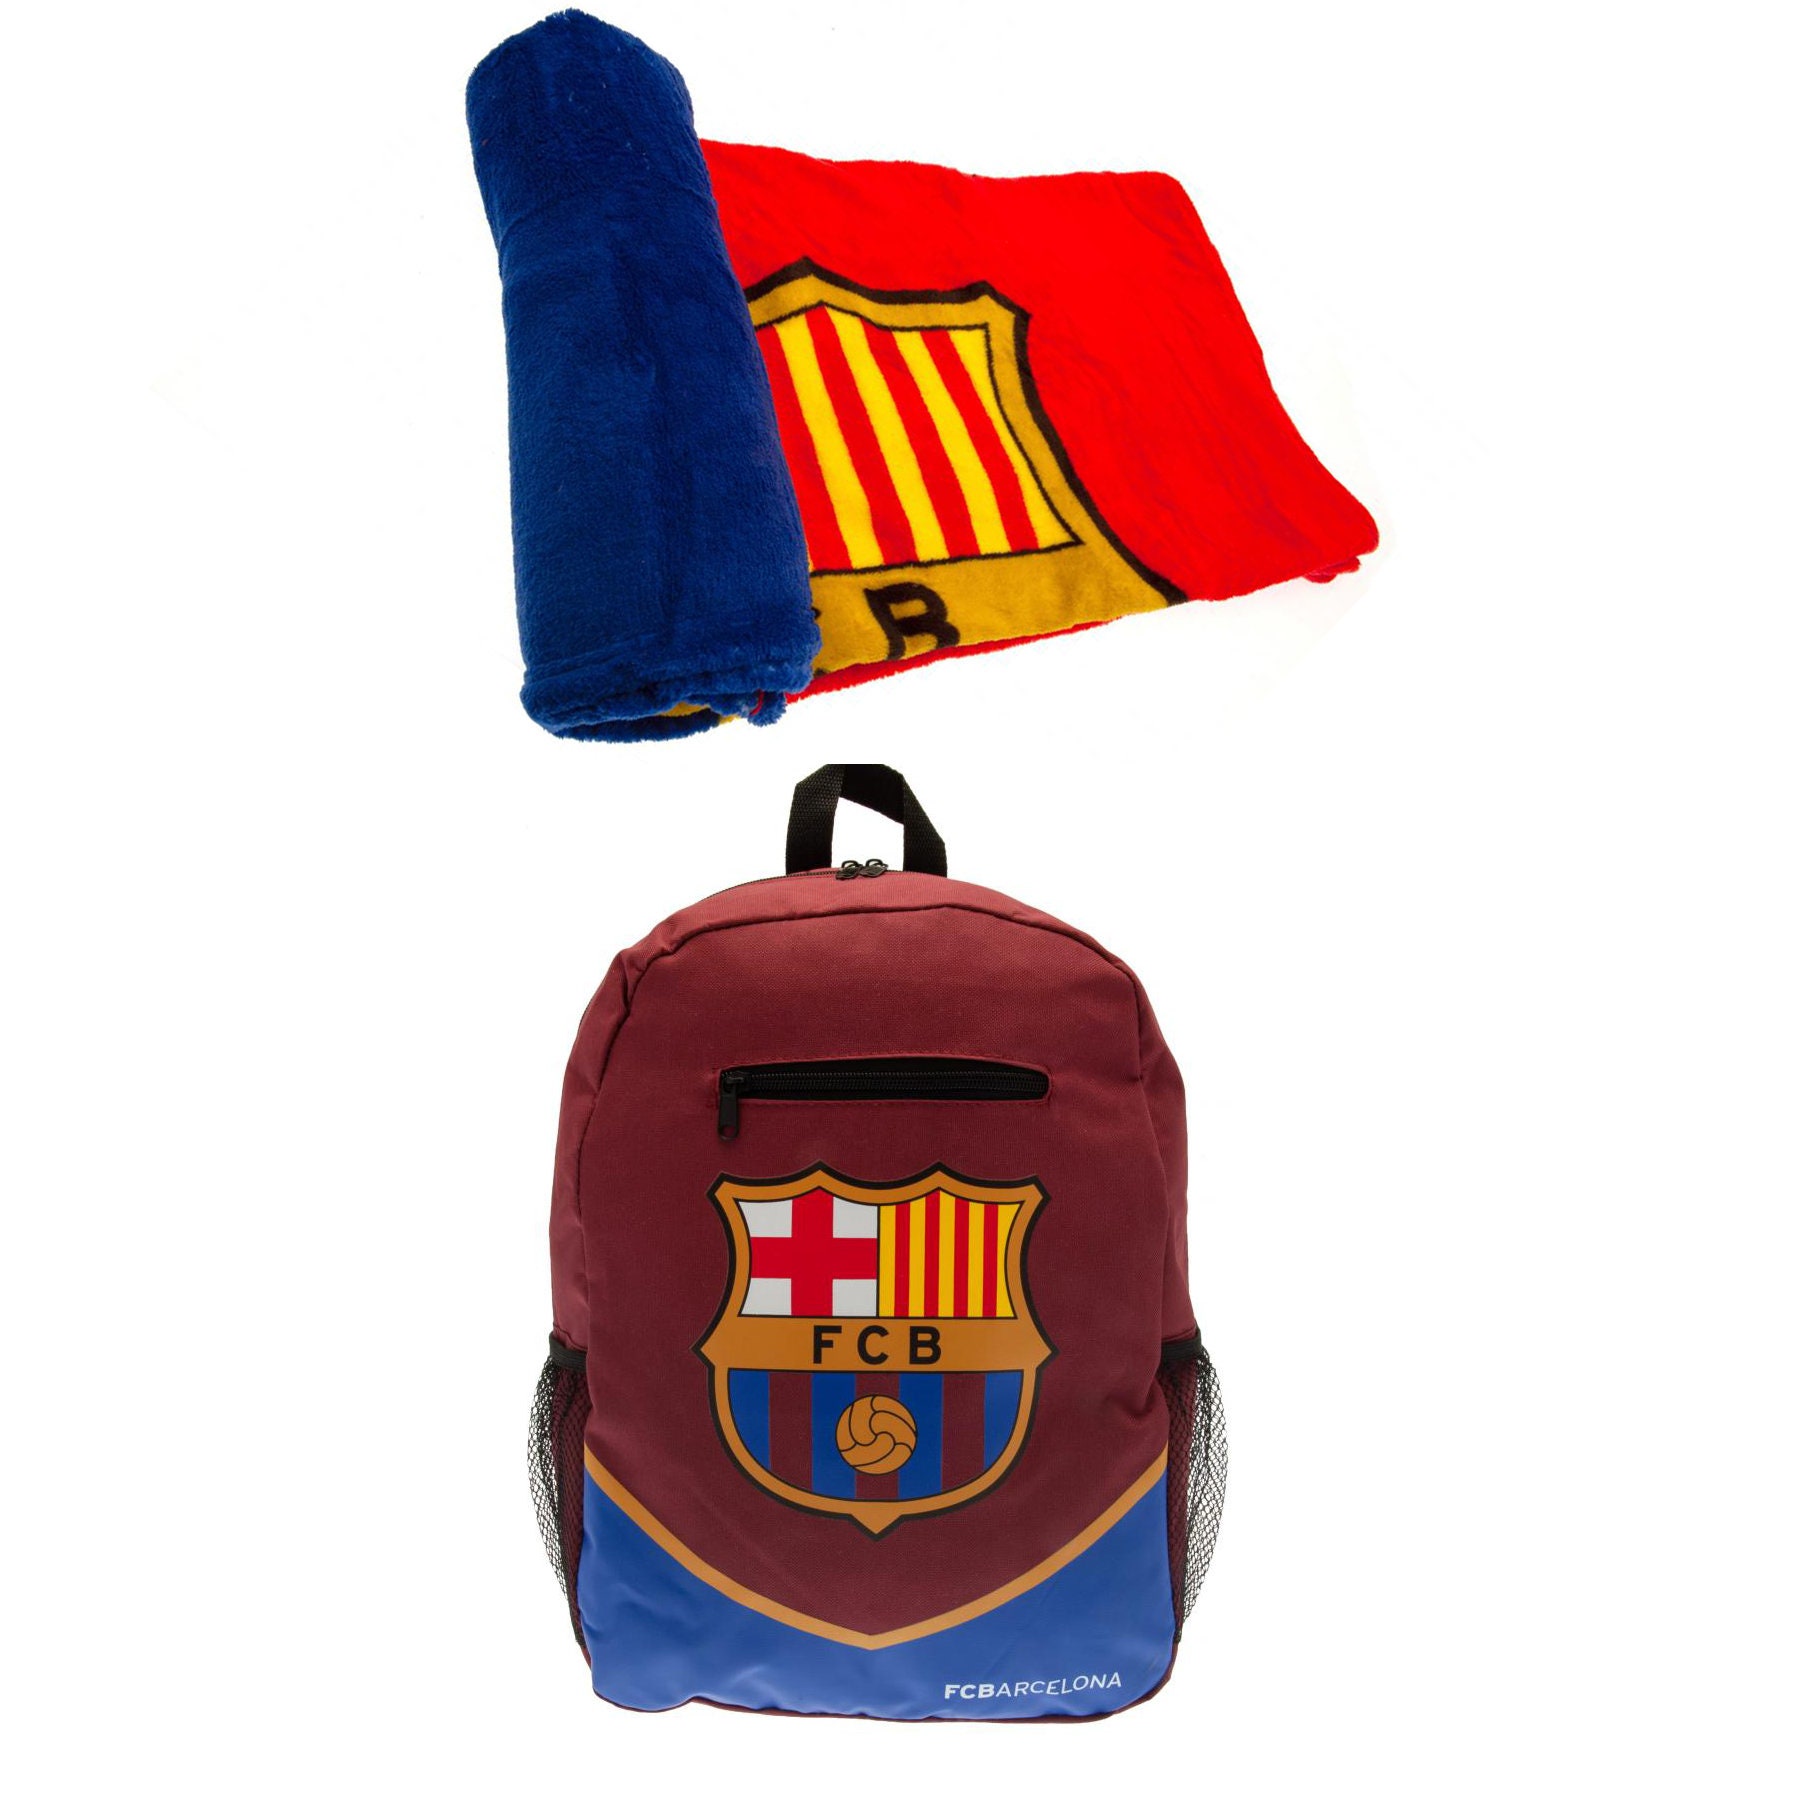 FC Barcelona Fan Gifts Licensed Barcelona Products - Etsy